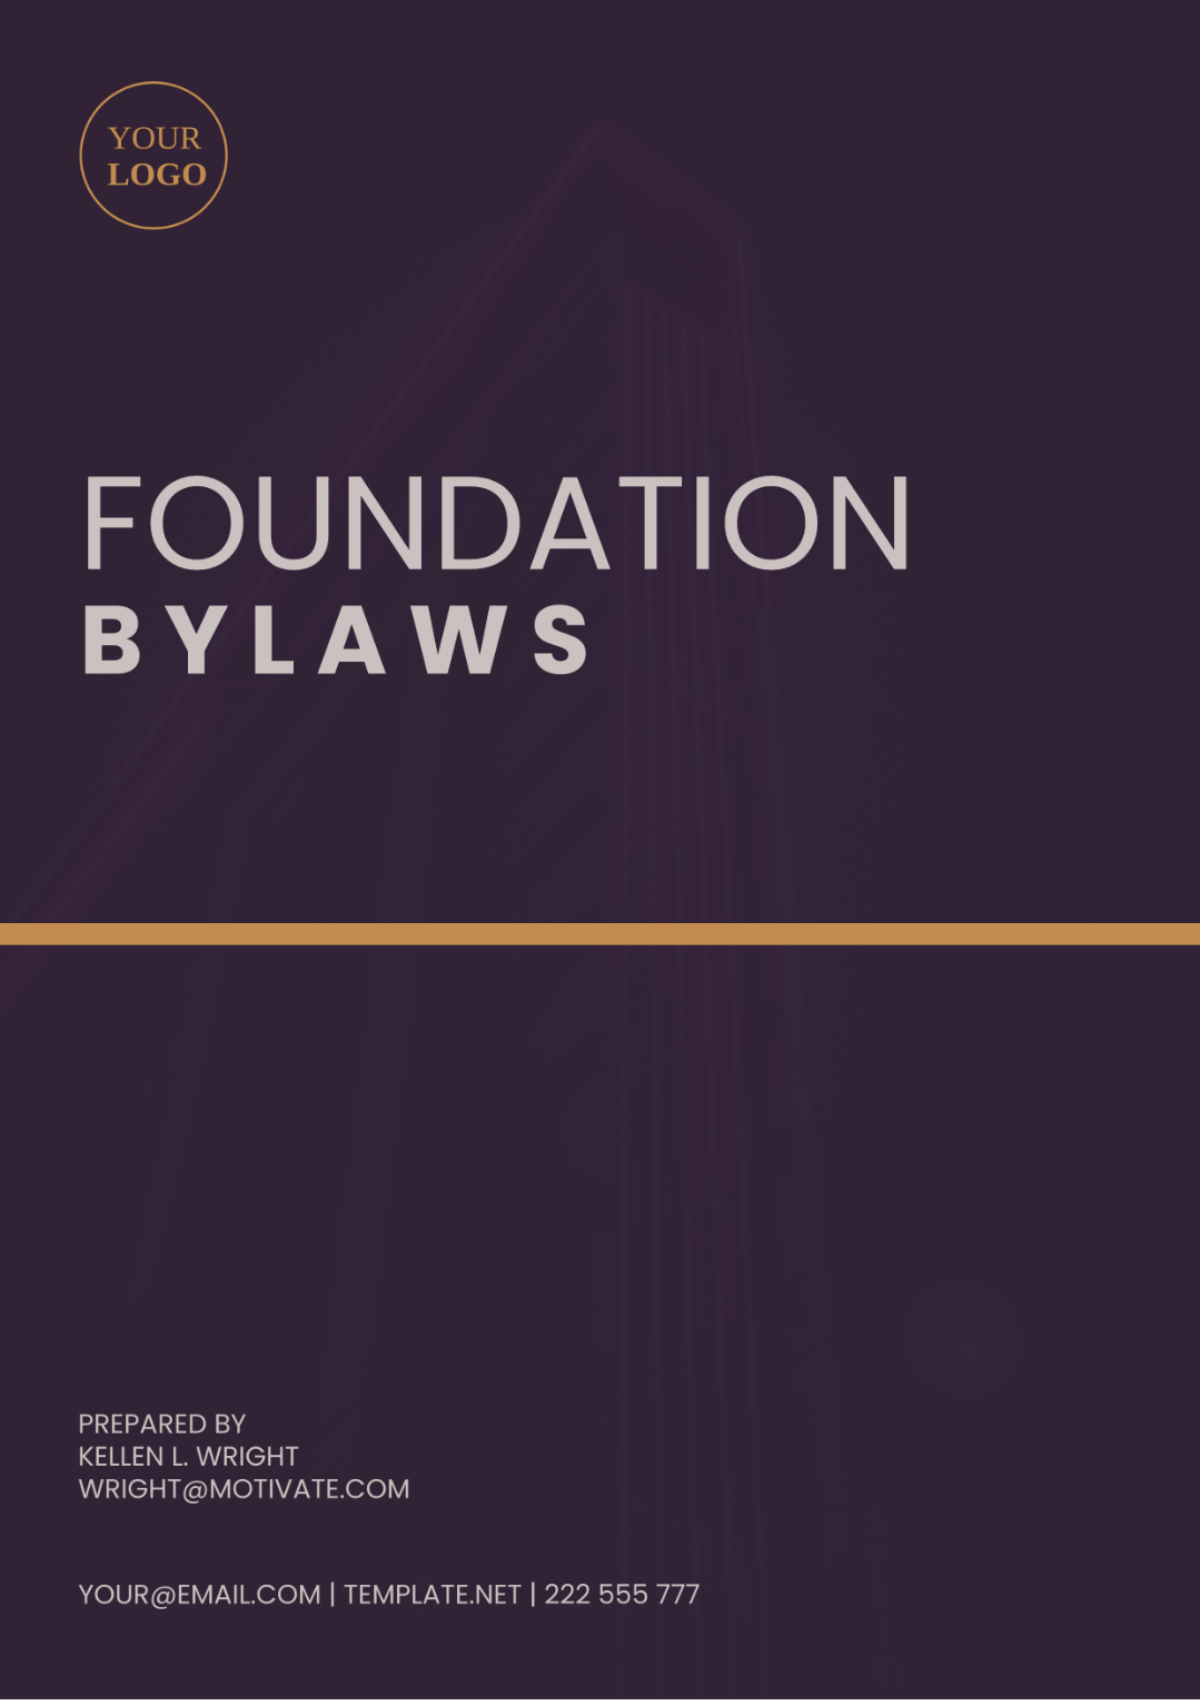 Foundation Bylaws Template